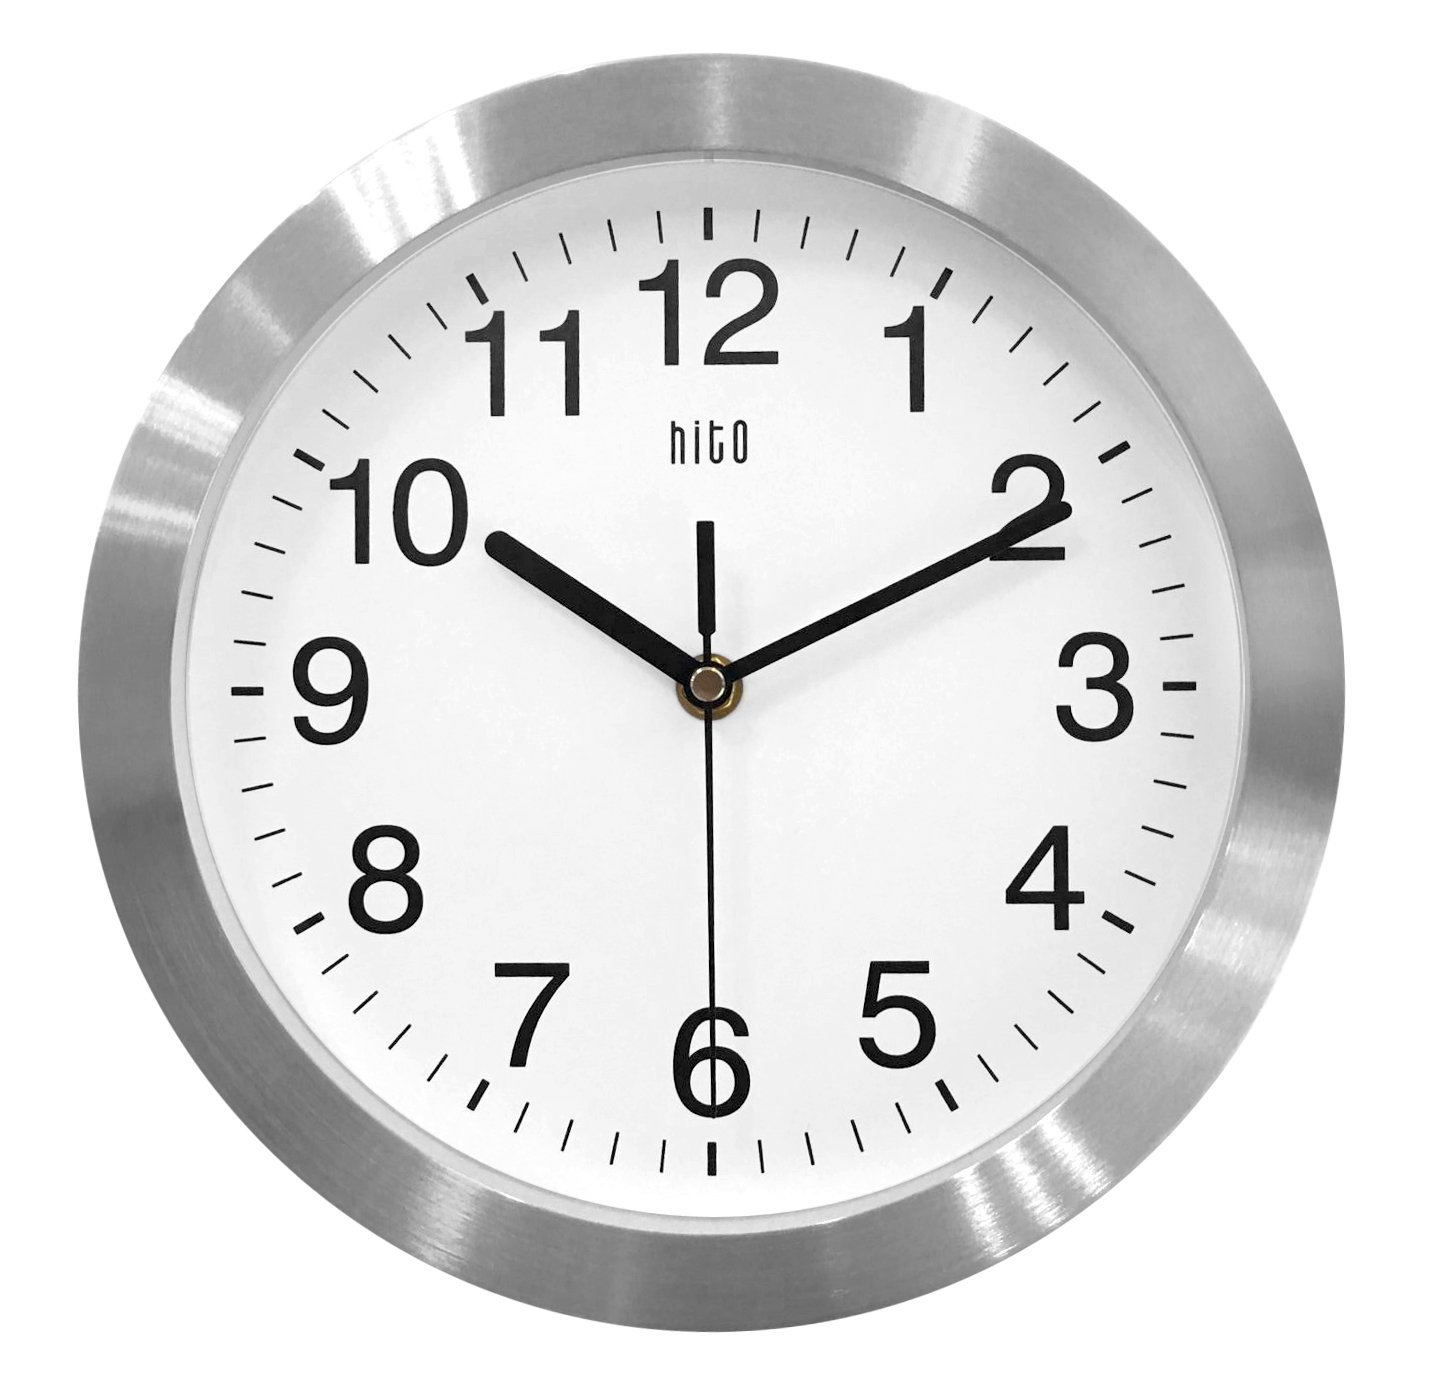 HITO Silent Non-ticking Wall Clock- Aluminum Frame Glass Cover, 10 inches (Silver)